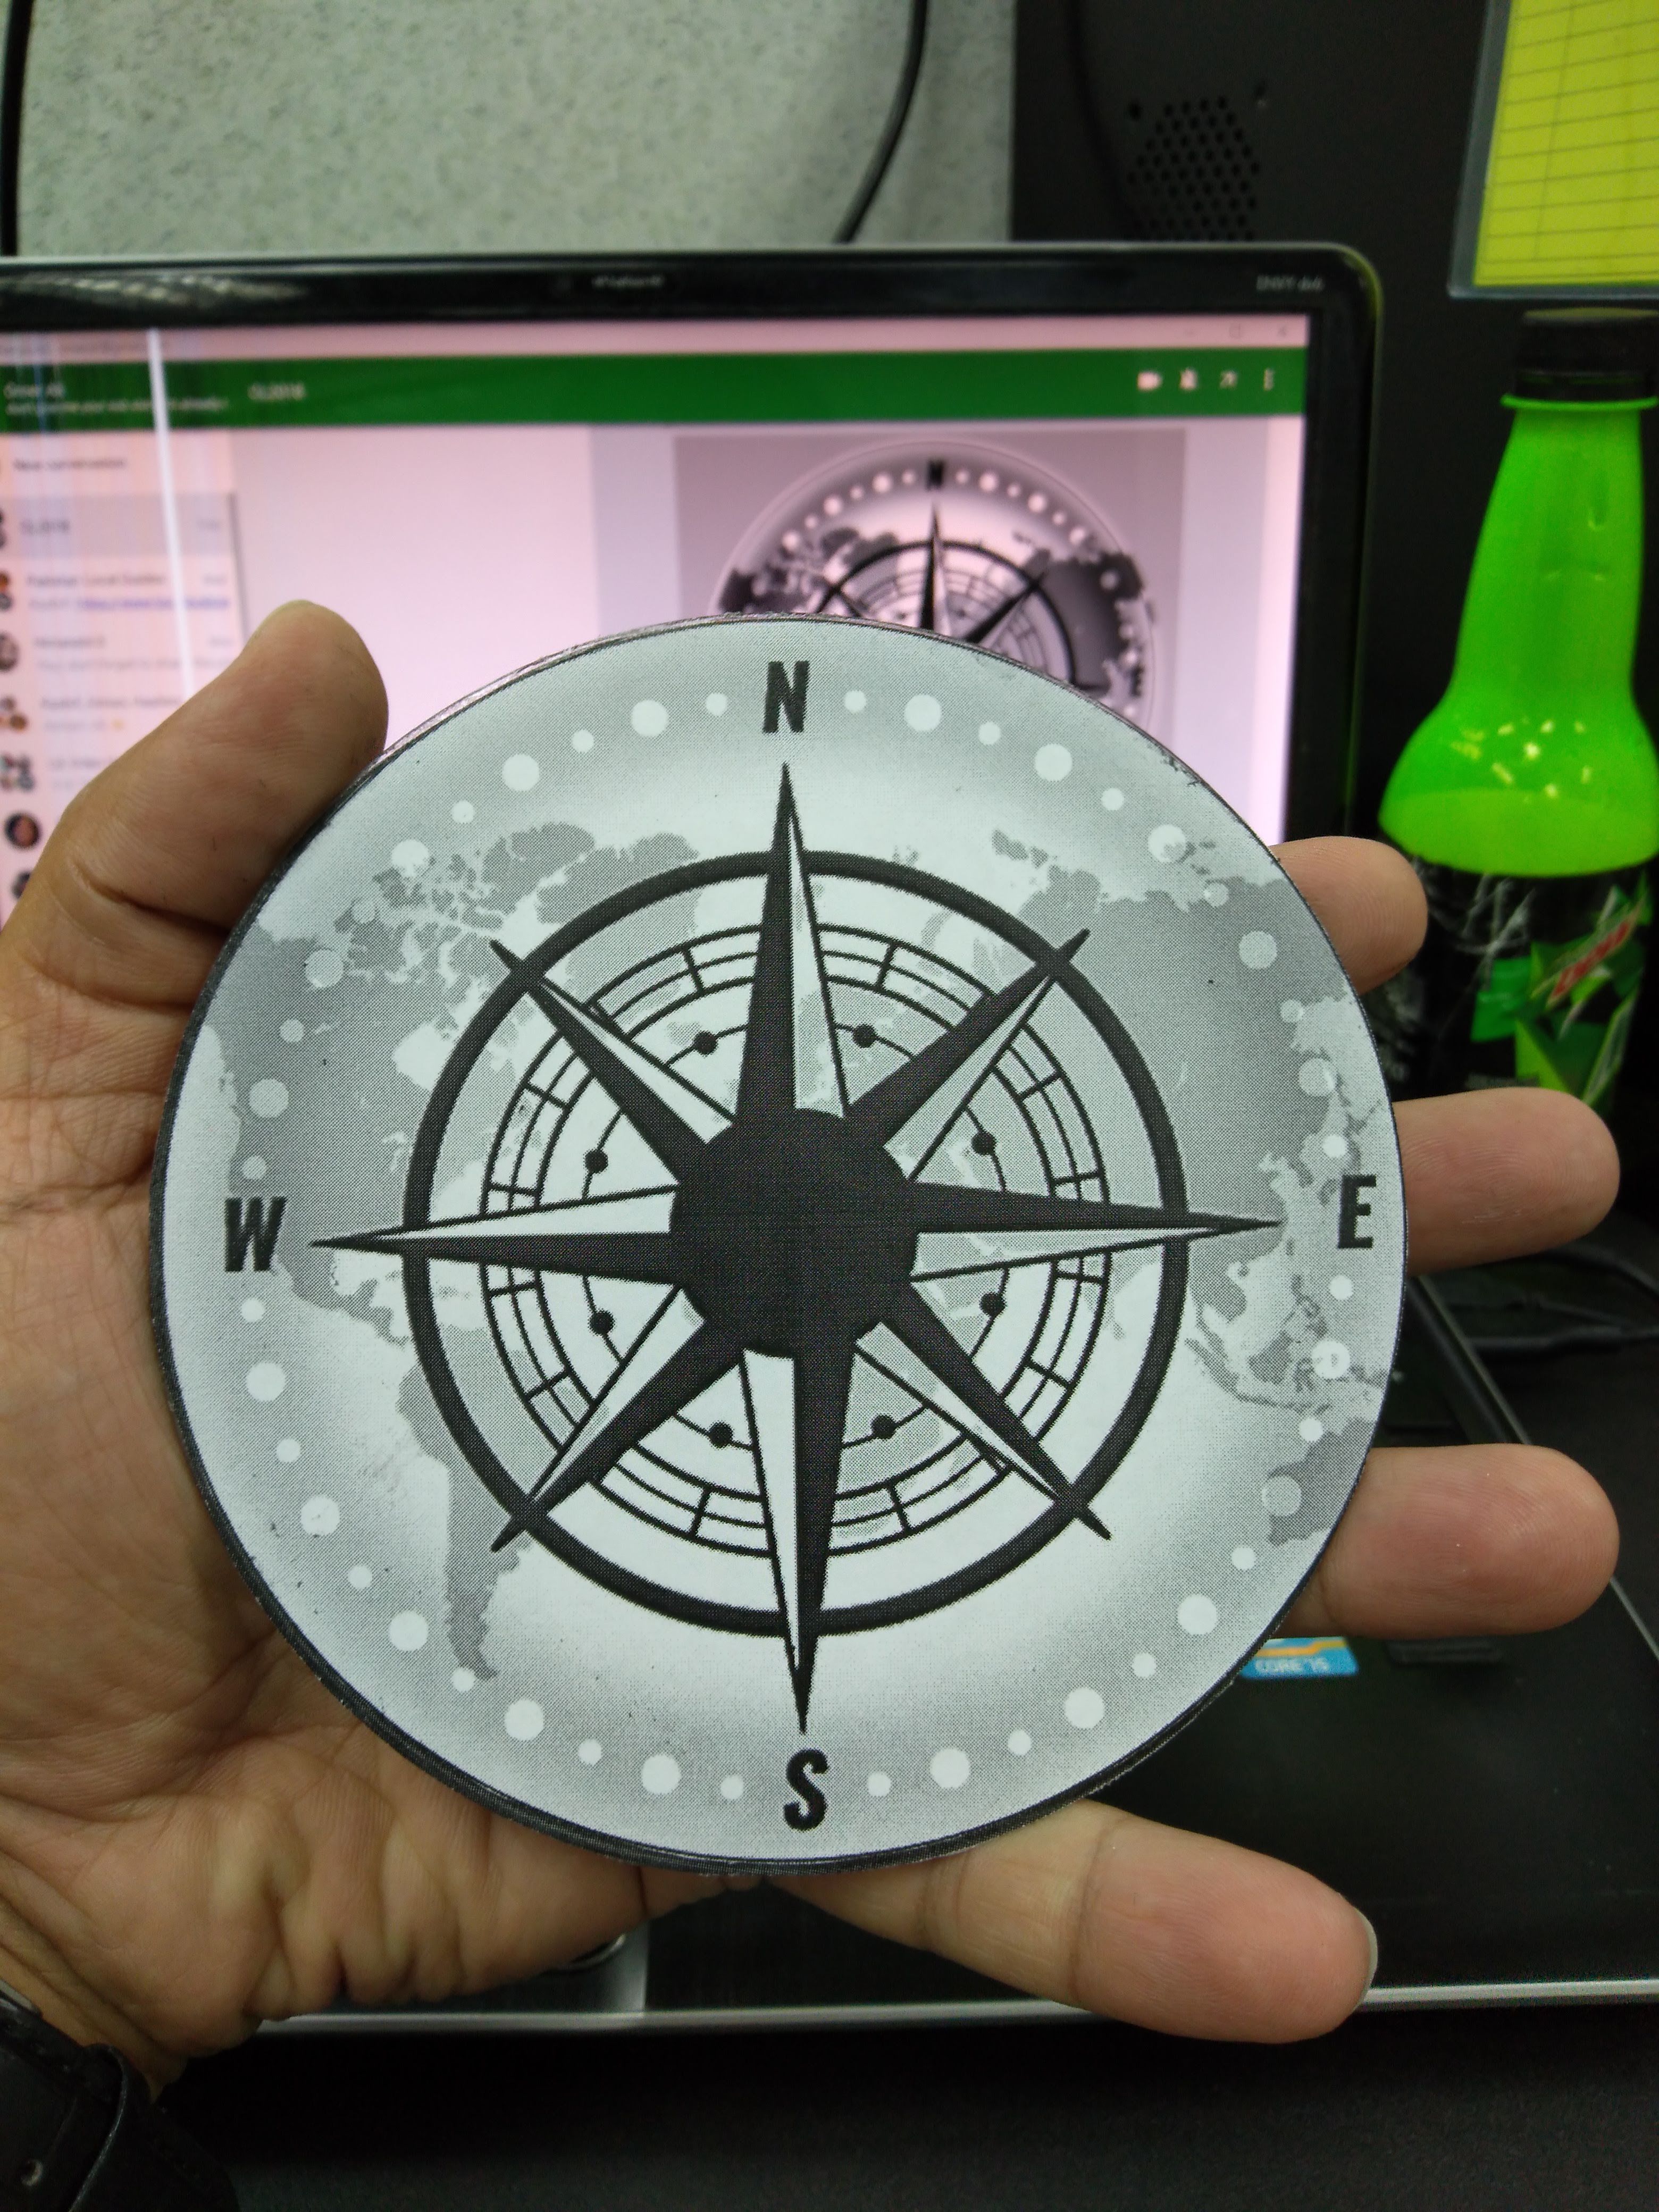 The compass design on the CD